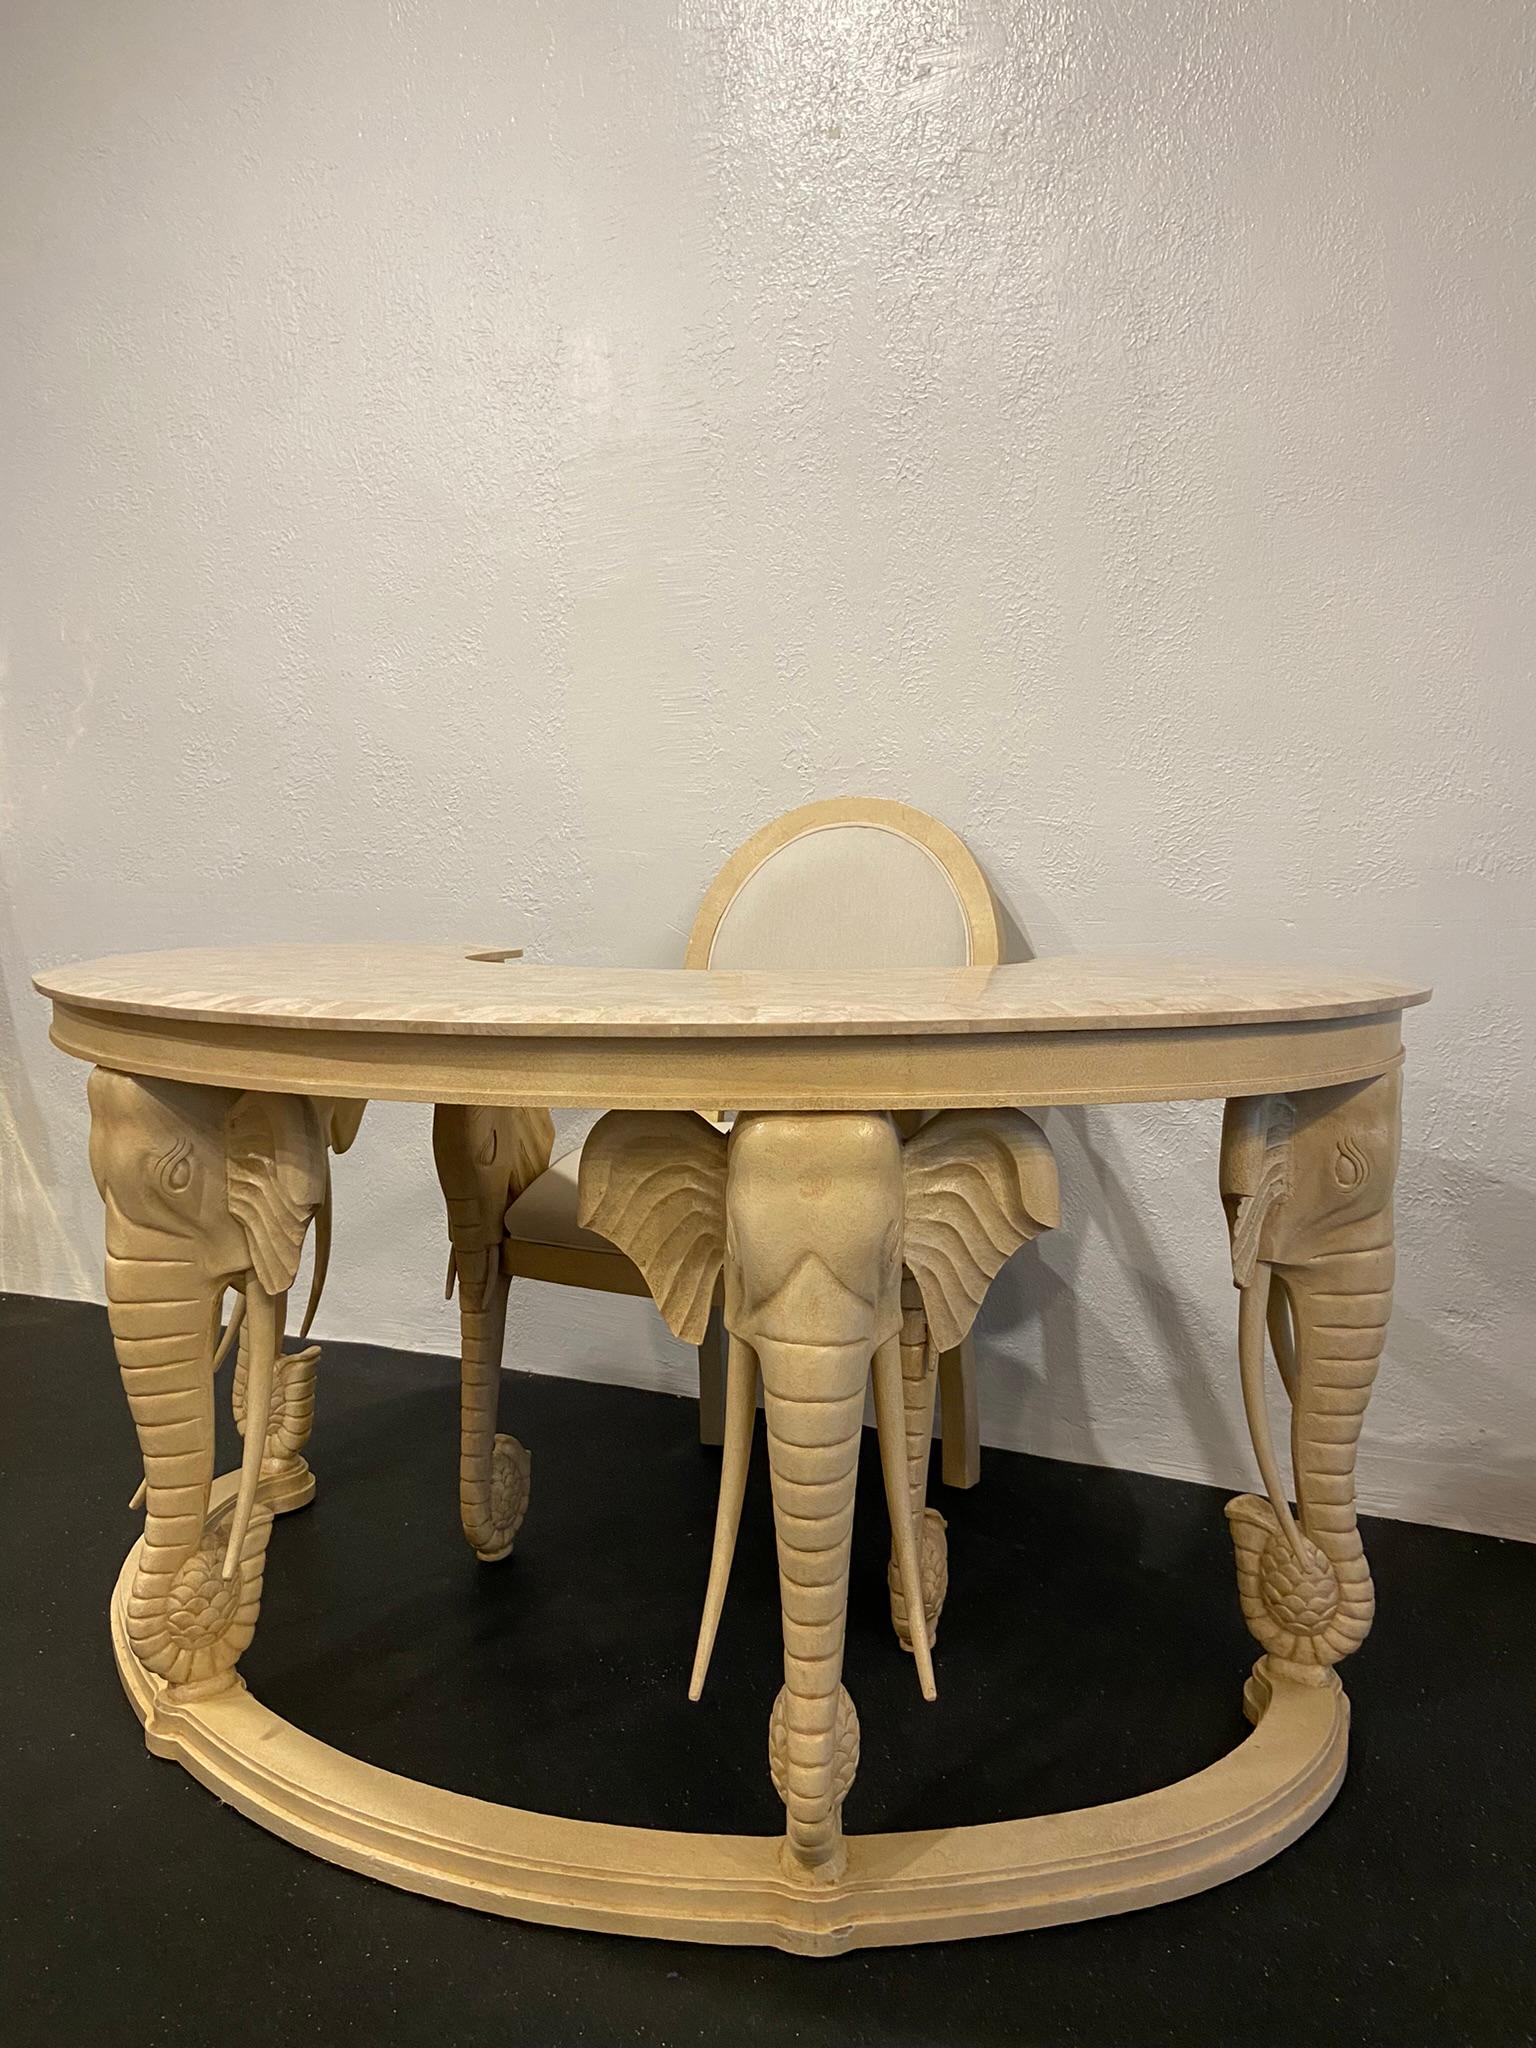 Stone top carved elephant desk and matching chair. All tusk are completely removable for safe transportation. Reupholstery is recommended on the chair. No chips or nicks to the stone top, a few areas of wear to the painted finish (please refer to